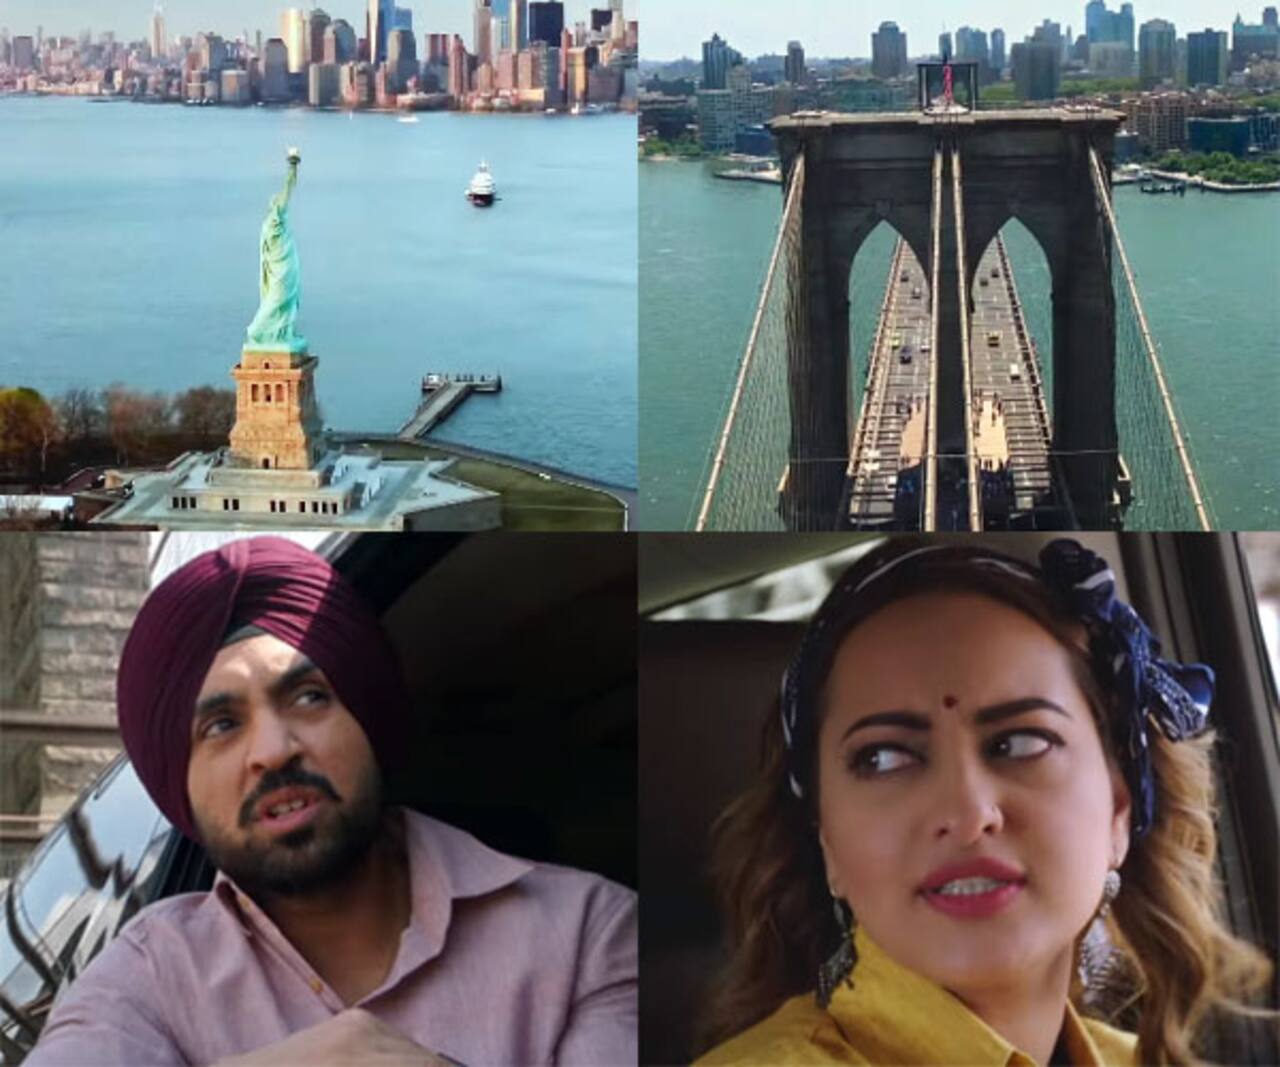 Welcome To New York dialogue promo: Sonakshi Sinha and Diljit Dosanjh  compare NYC to Baroda and Ludhiana in this hilarious video - watch now -  Bollywood News & Gossip, Movie Reviews, Trailers